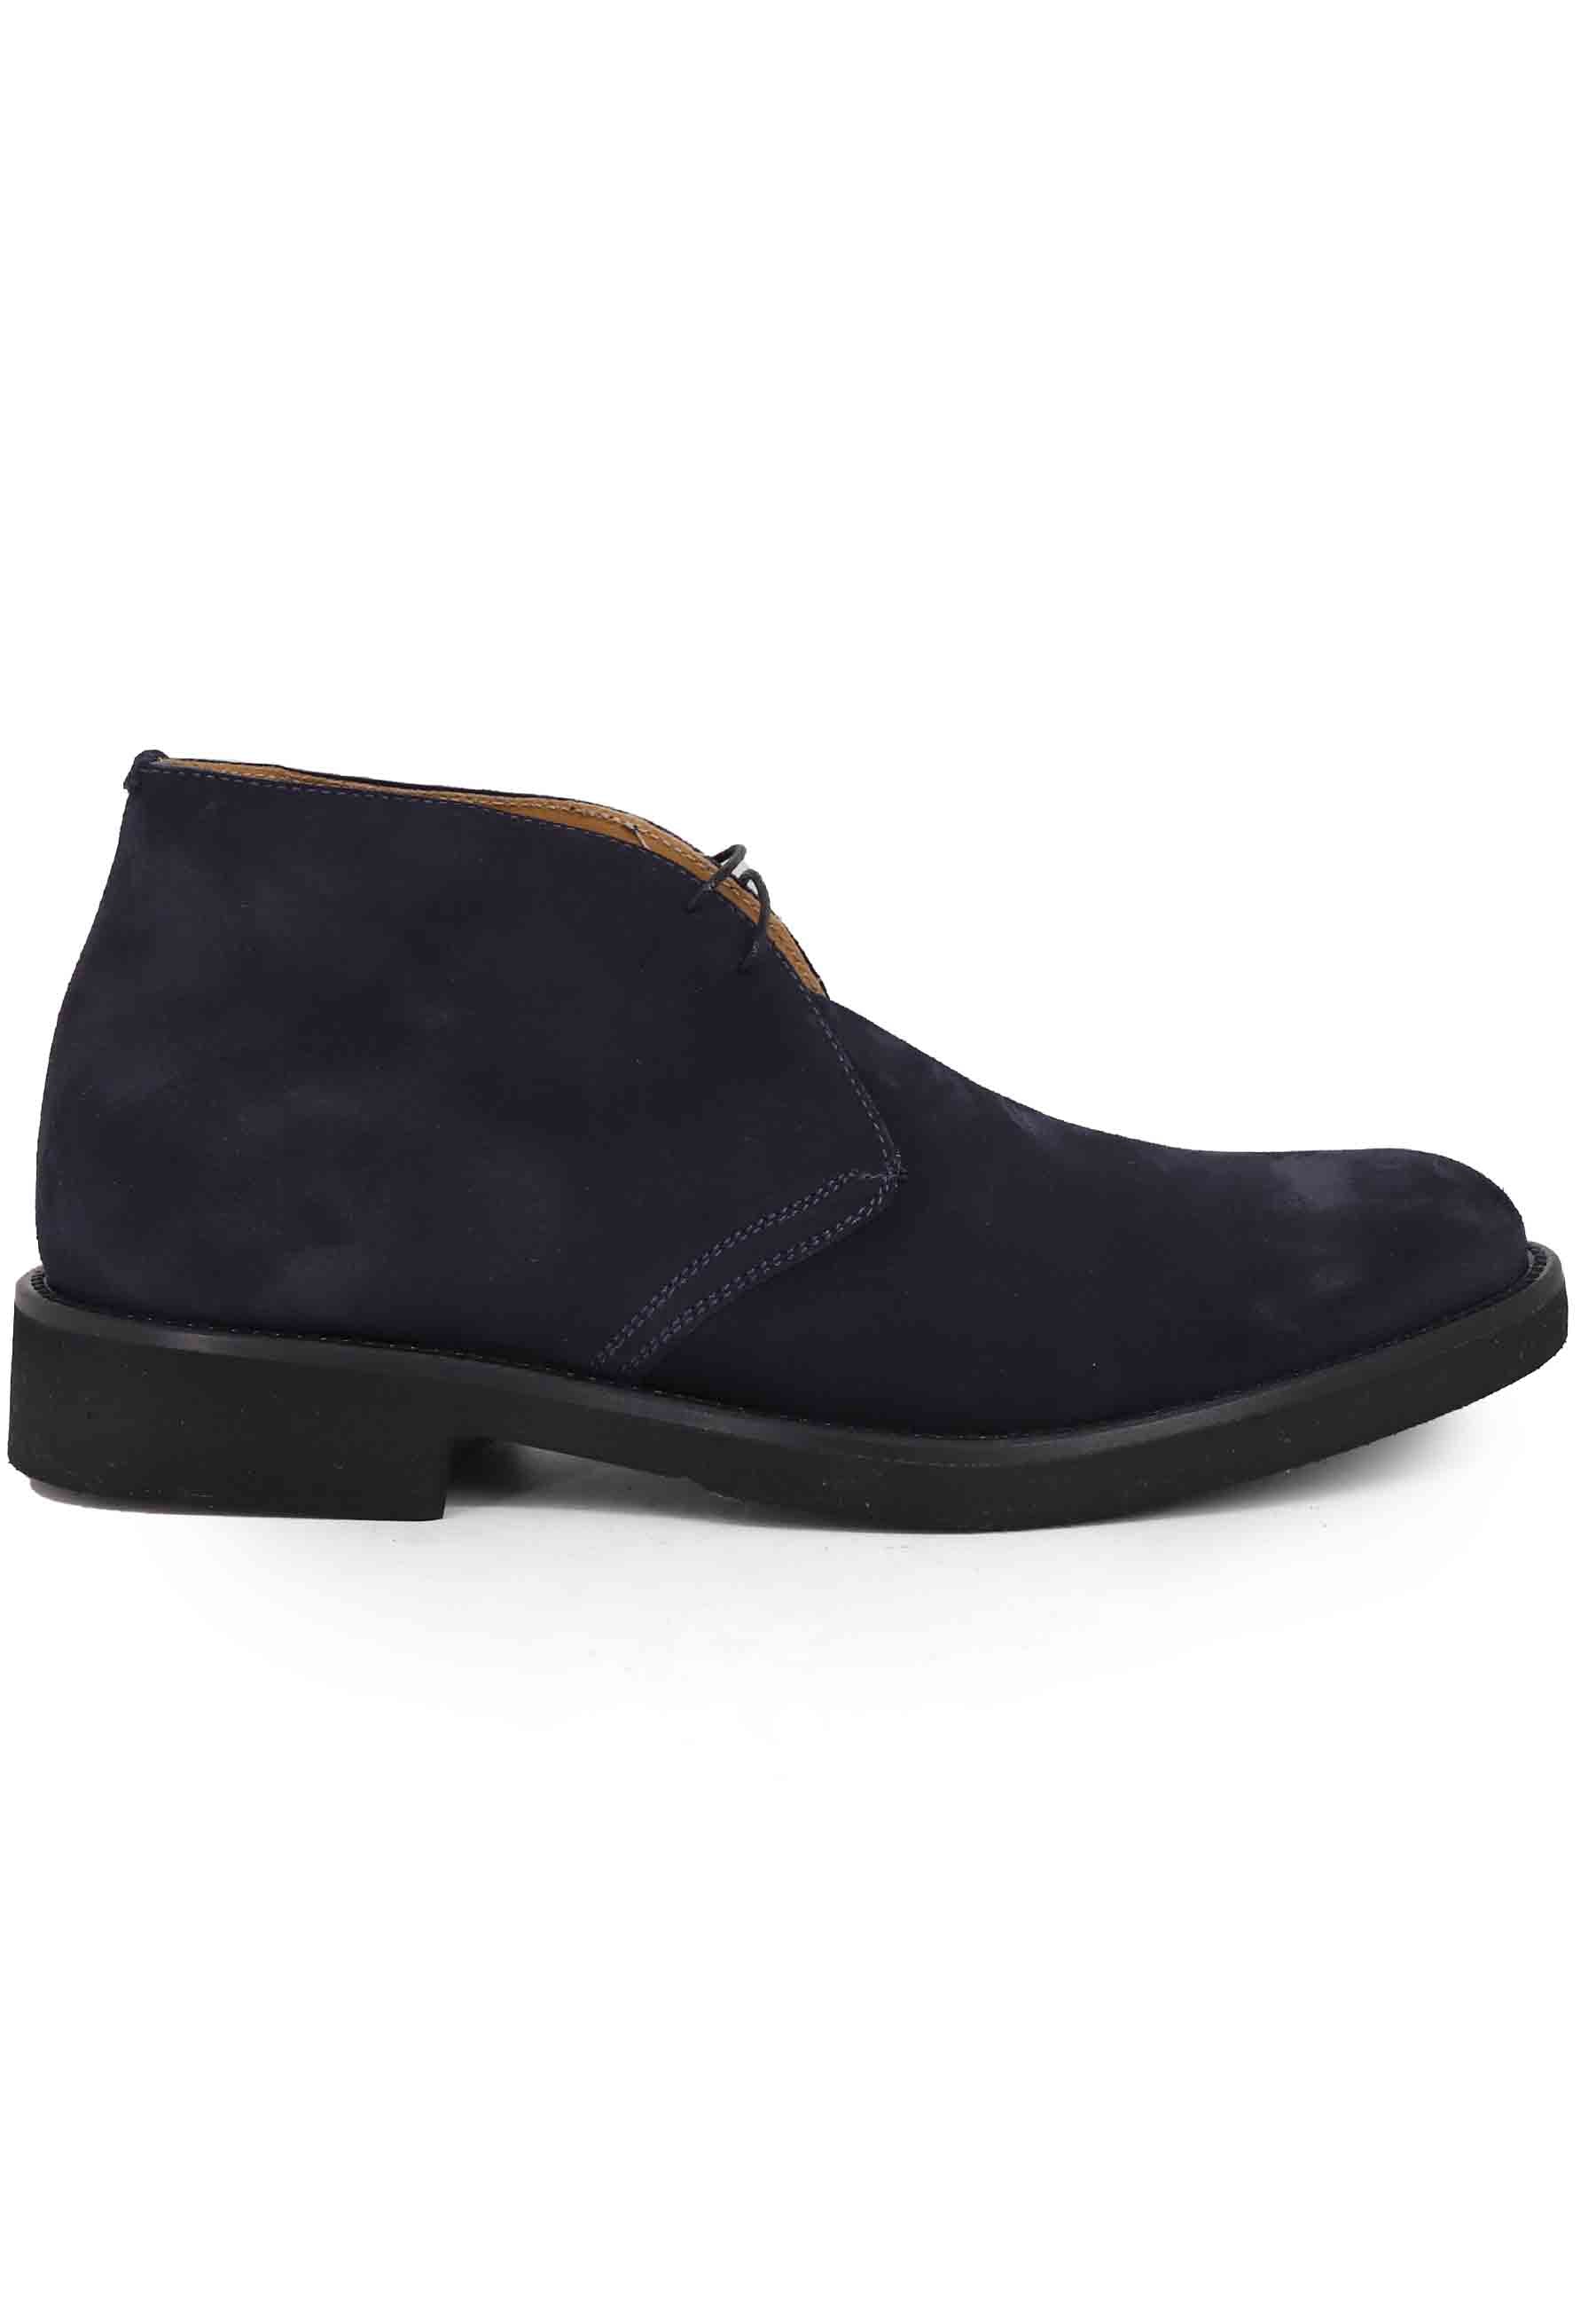 Men's blue suede ankle boots with ultra-light rubber sole